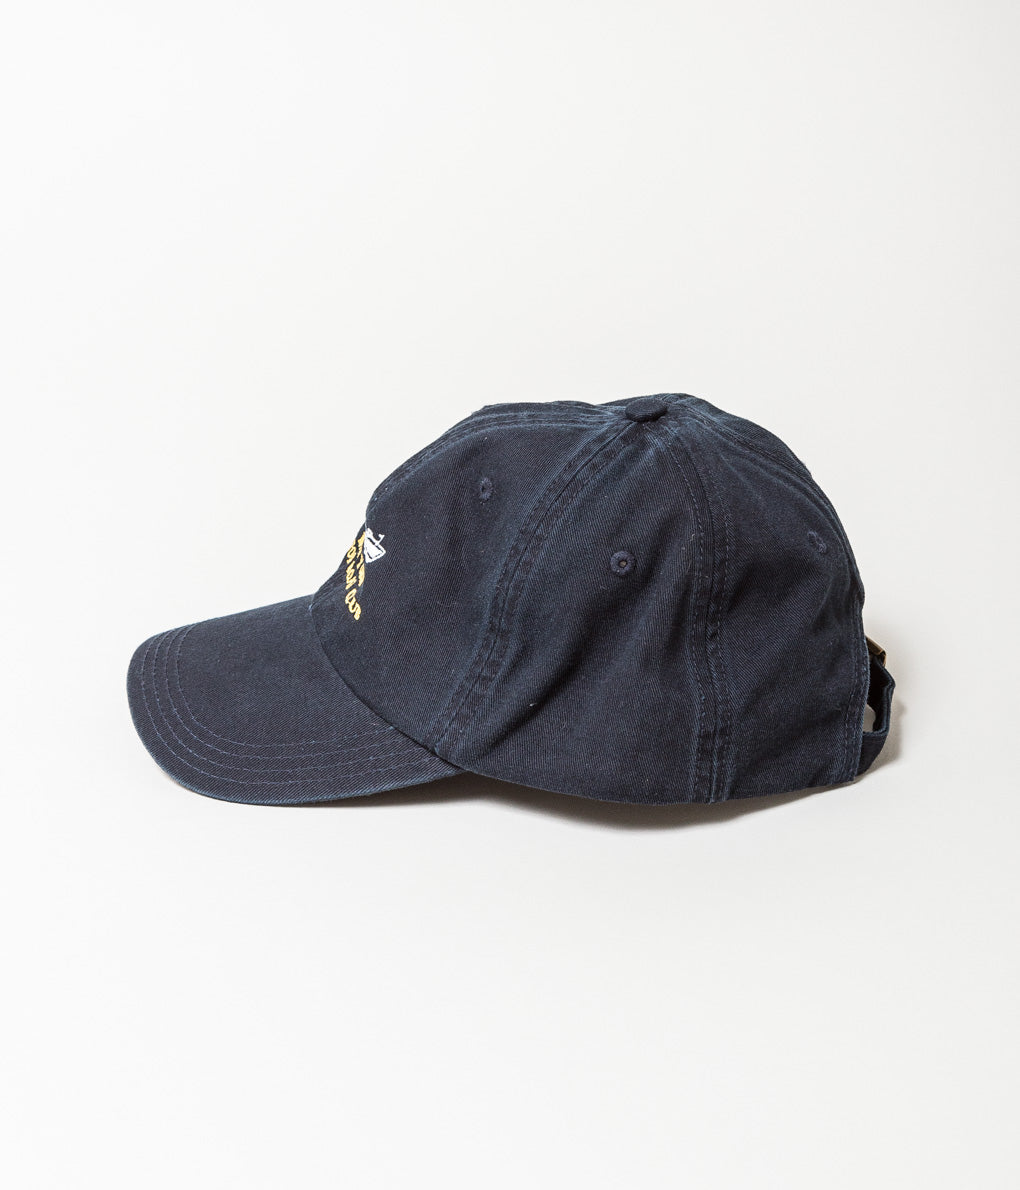 OLD SOLDIER "BOAT CLUB CAPS"(NAVY)